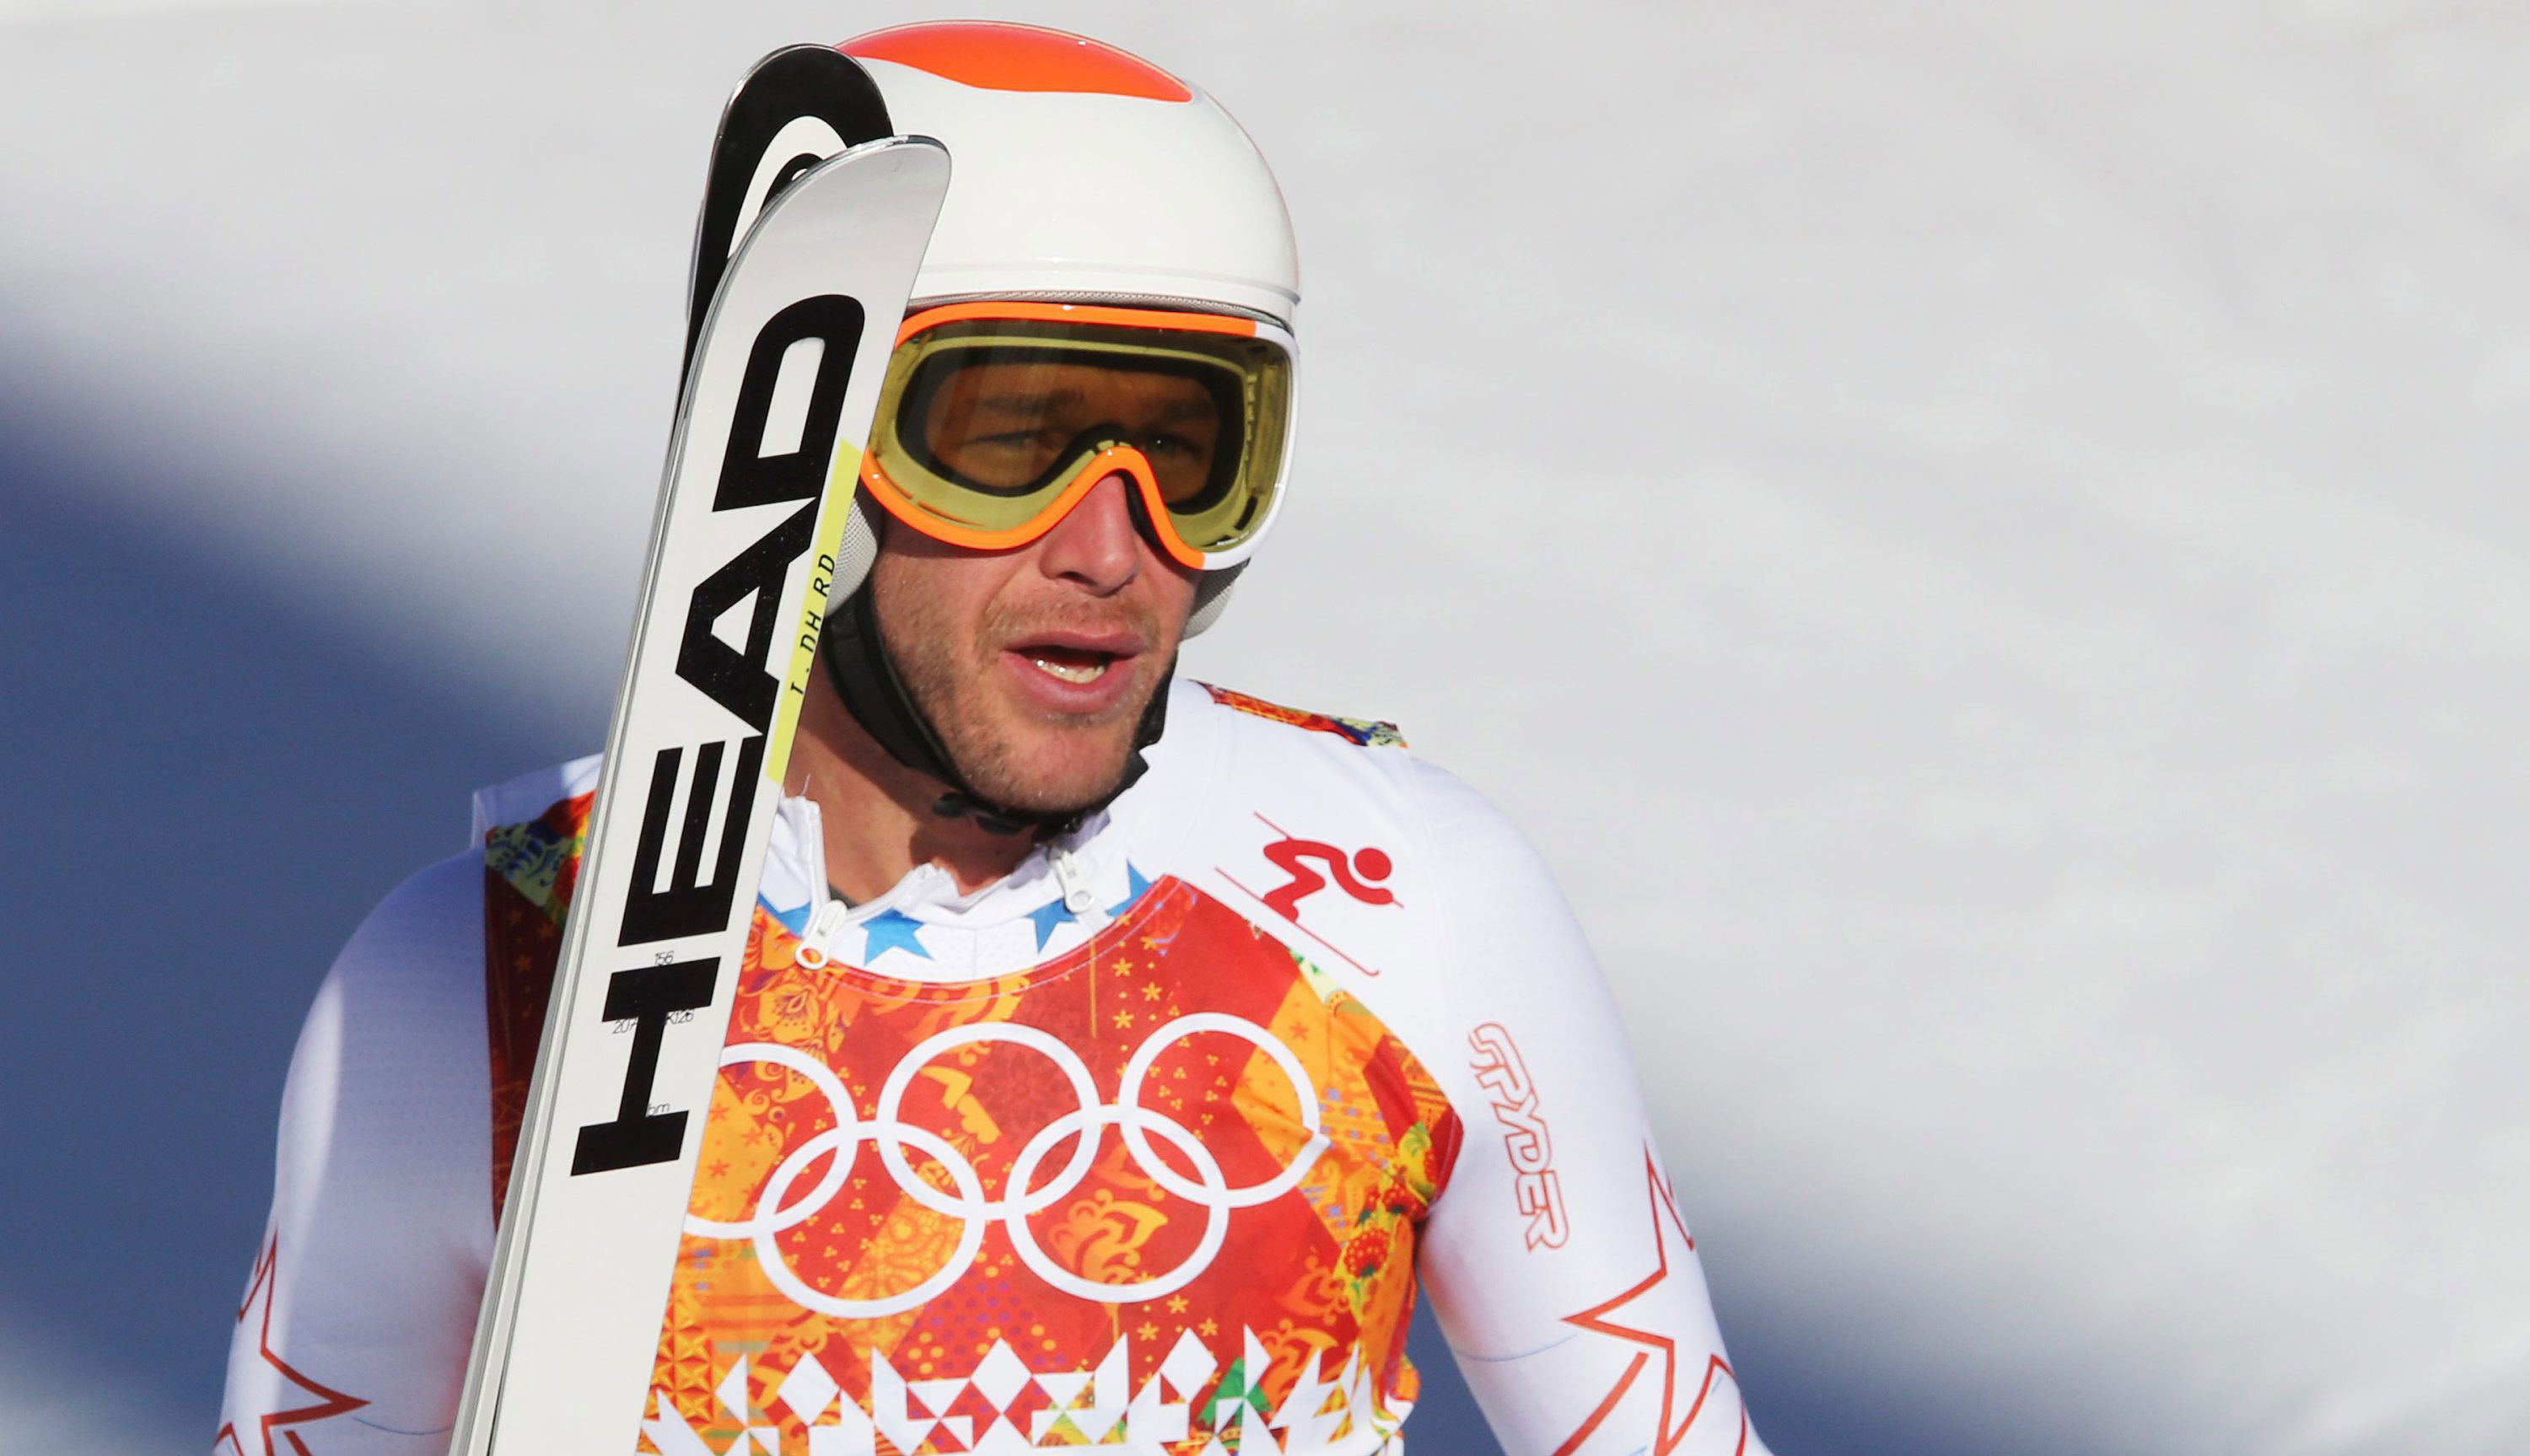 American Bronze Medalist Skier Bode Miller At The Olympics